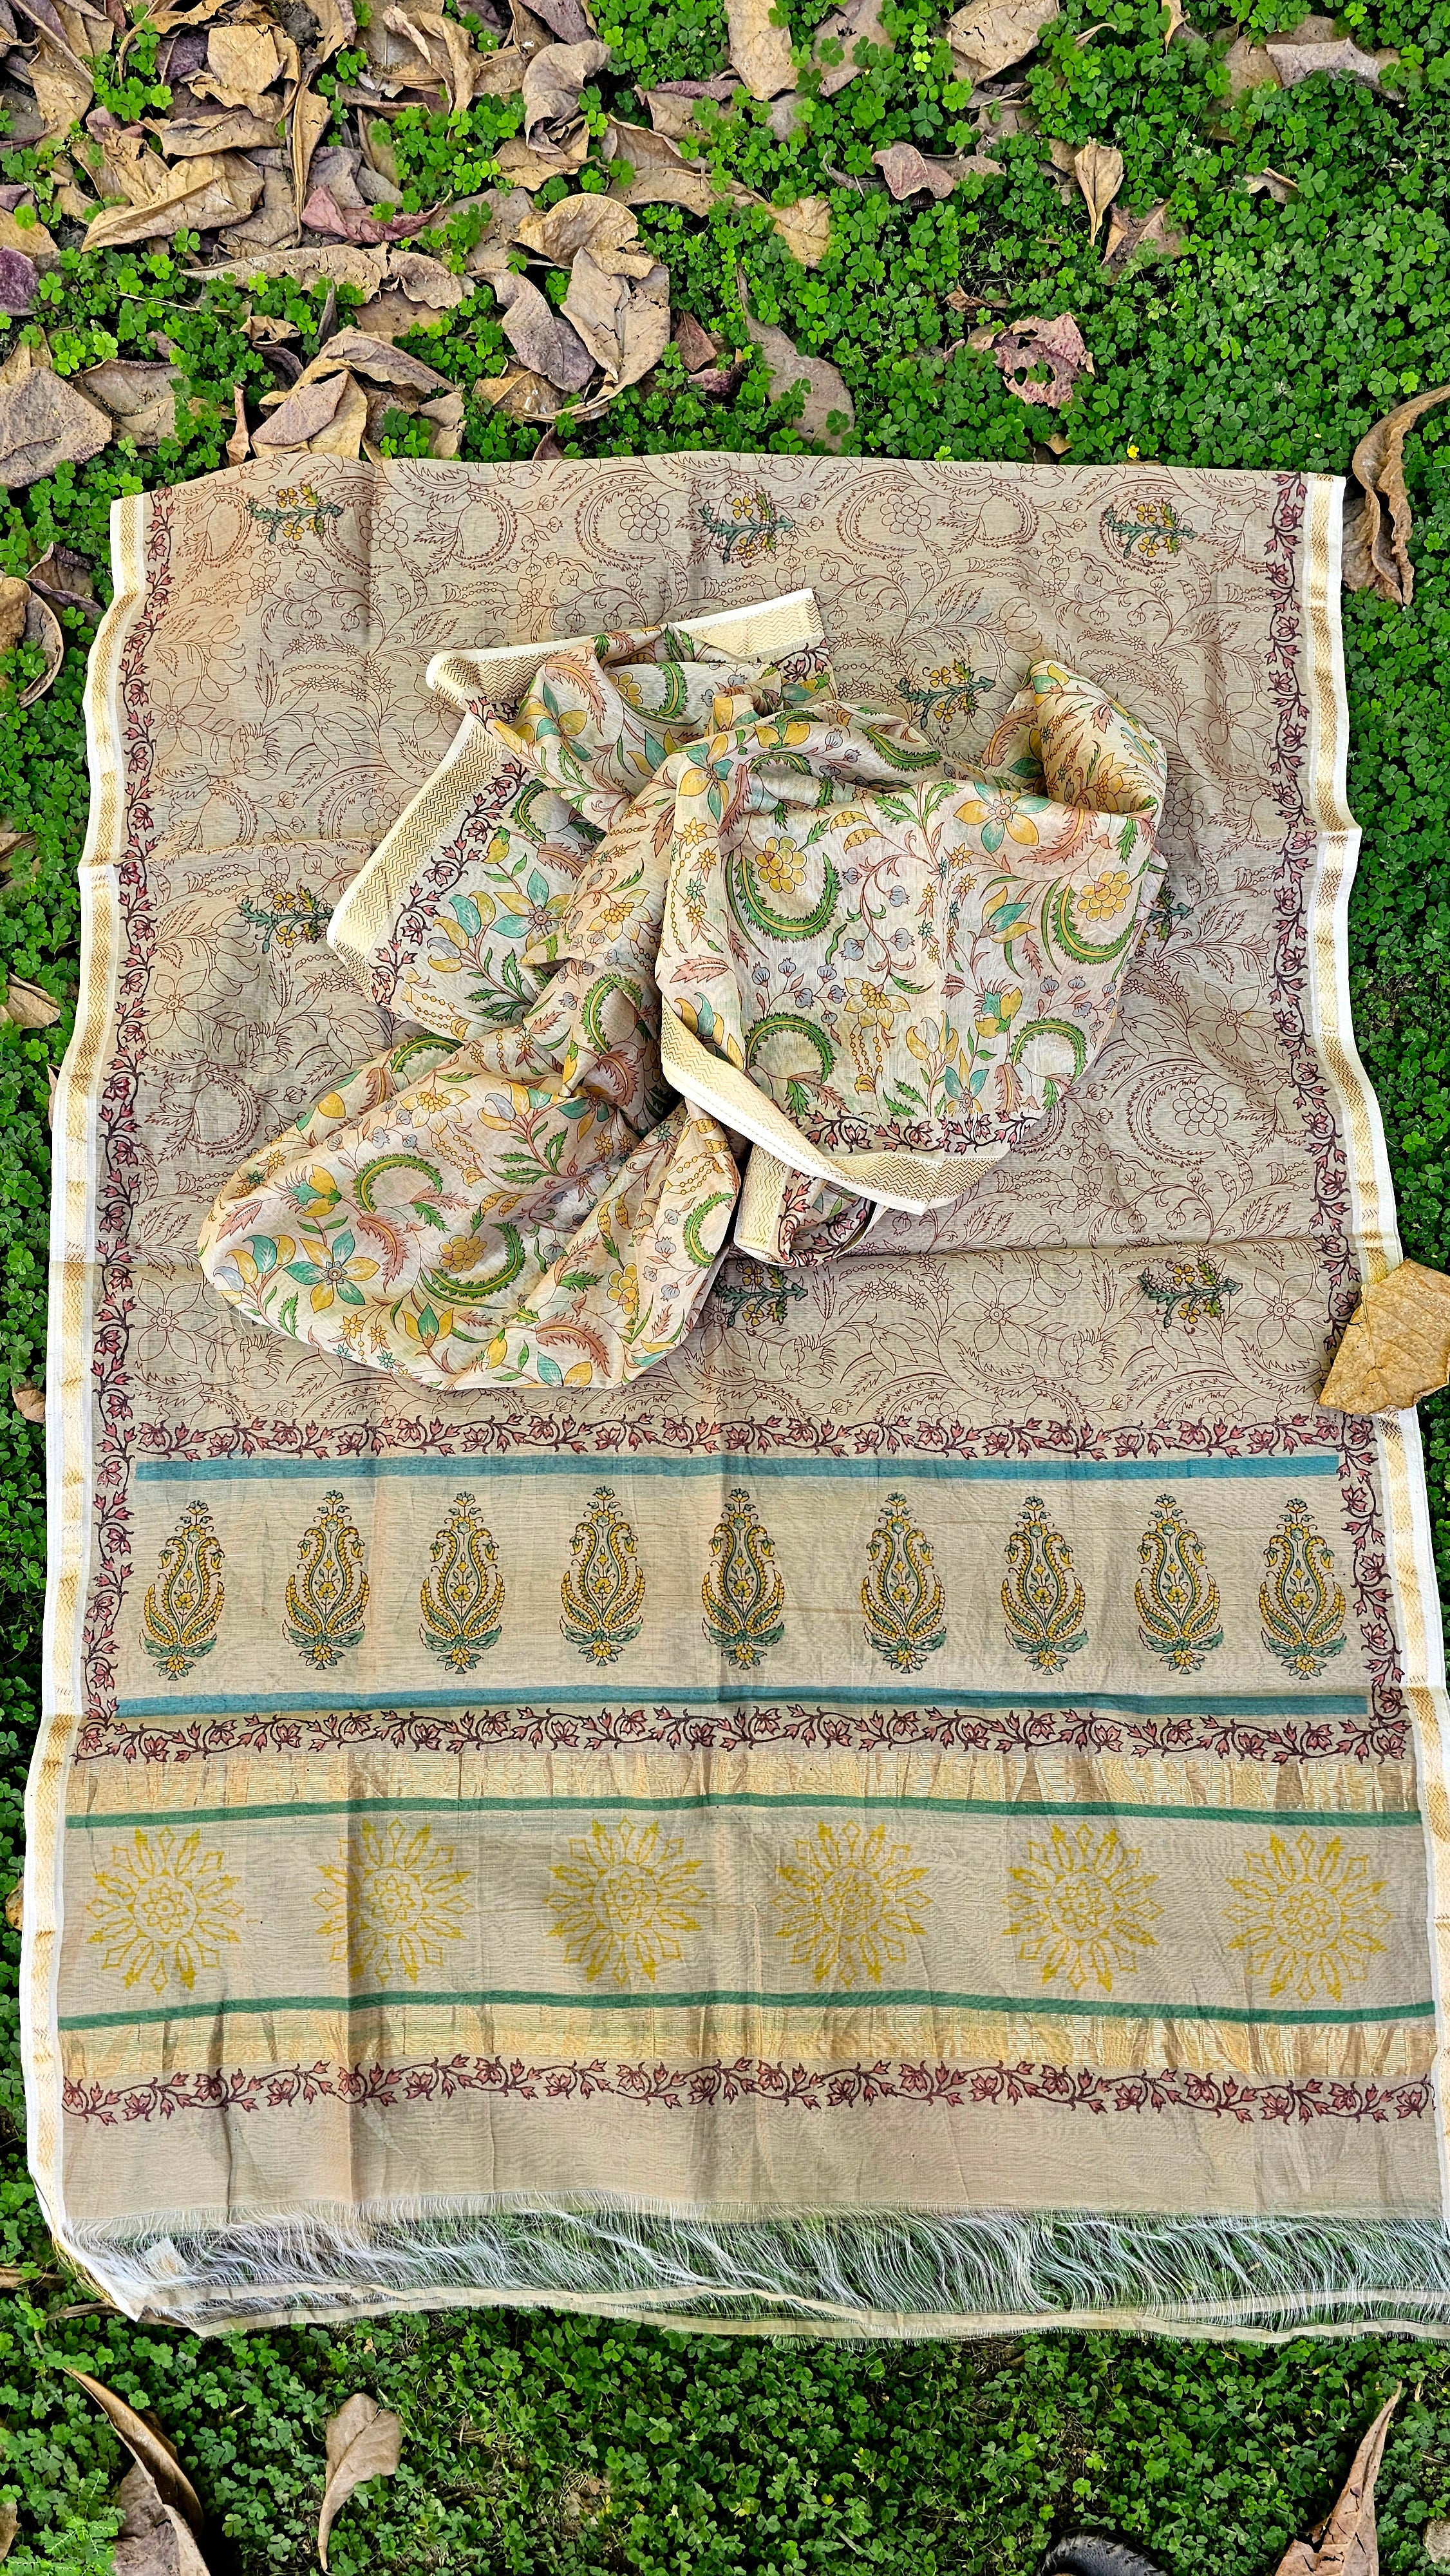 Top and Dupatta set with Hand Block prints and Gold Zari Borders.